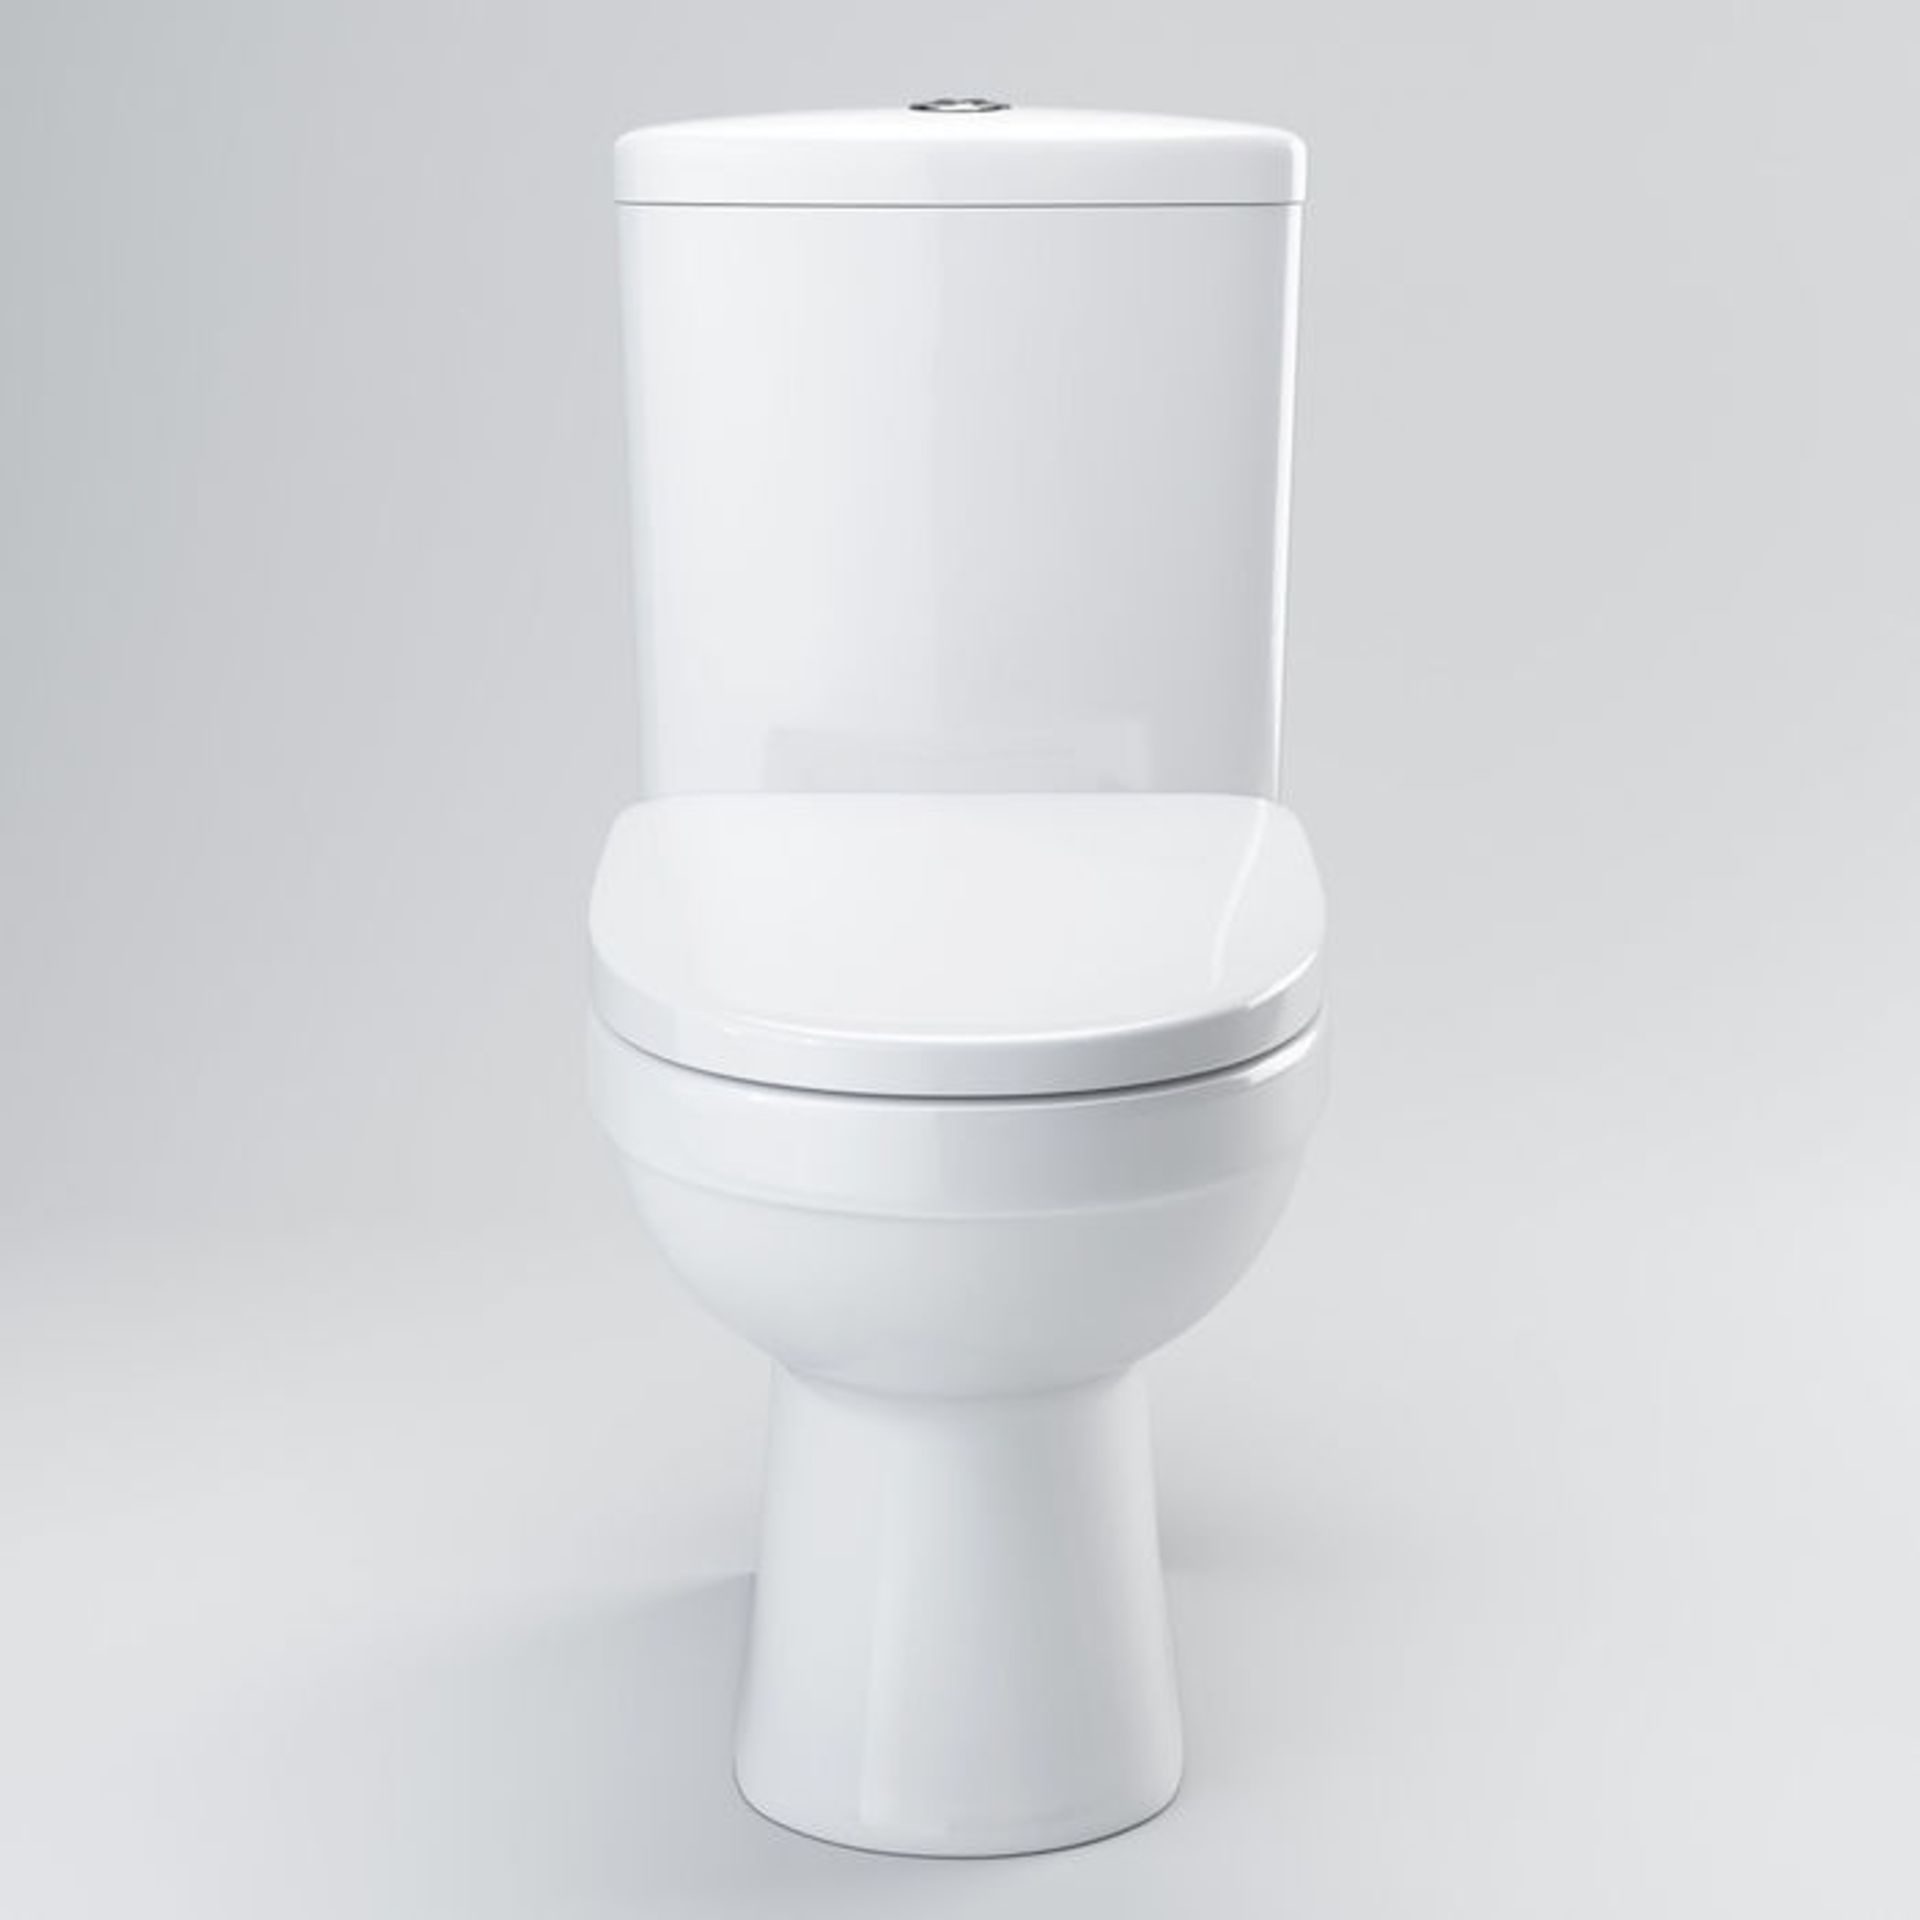 (P209) Sabrosa II Close Coupled Toilet & Cistern inc Soft Close Seat. Made from White Vitreous China - Image 4 of 4